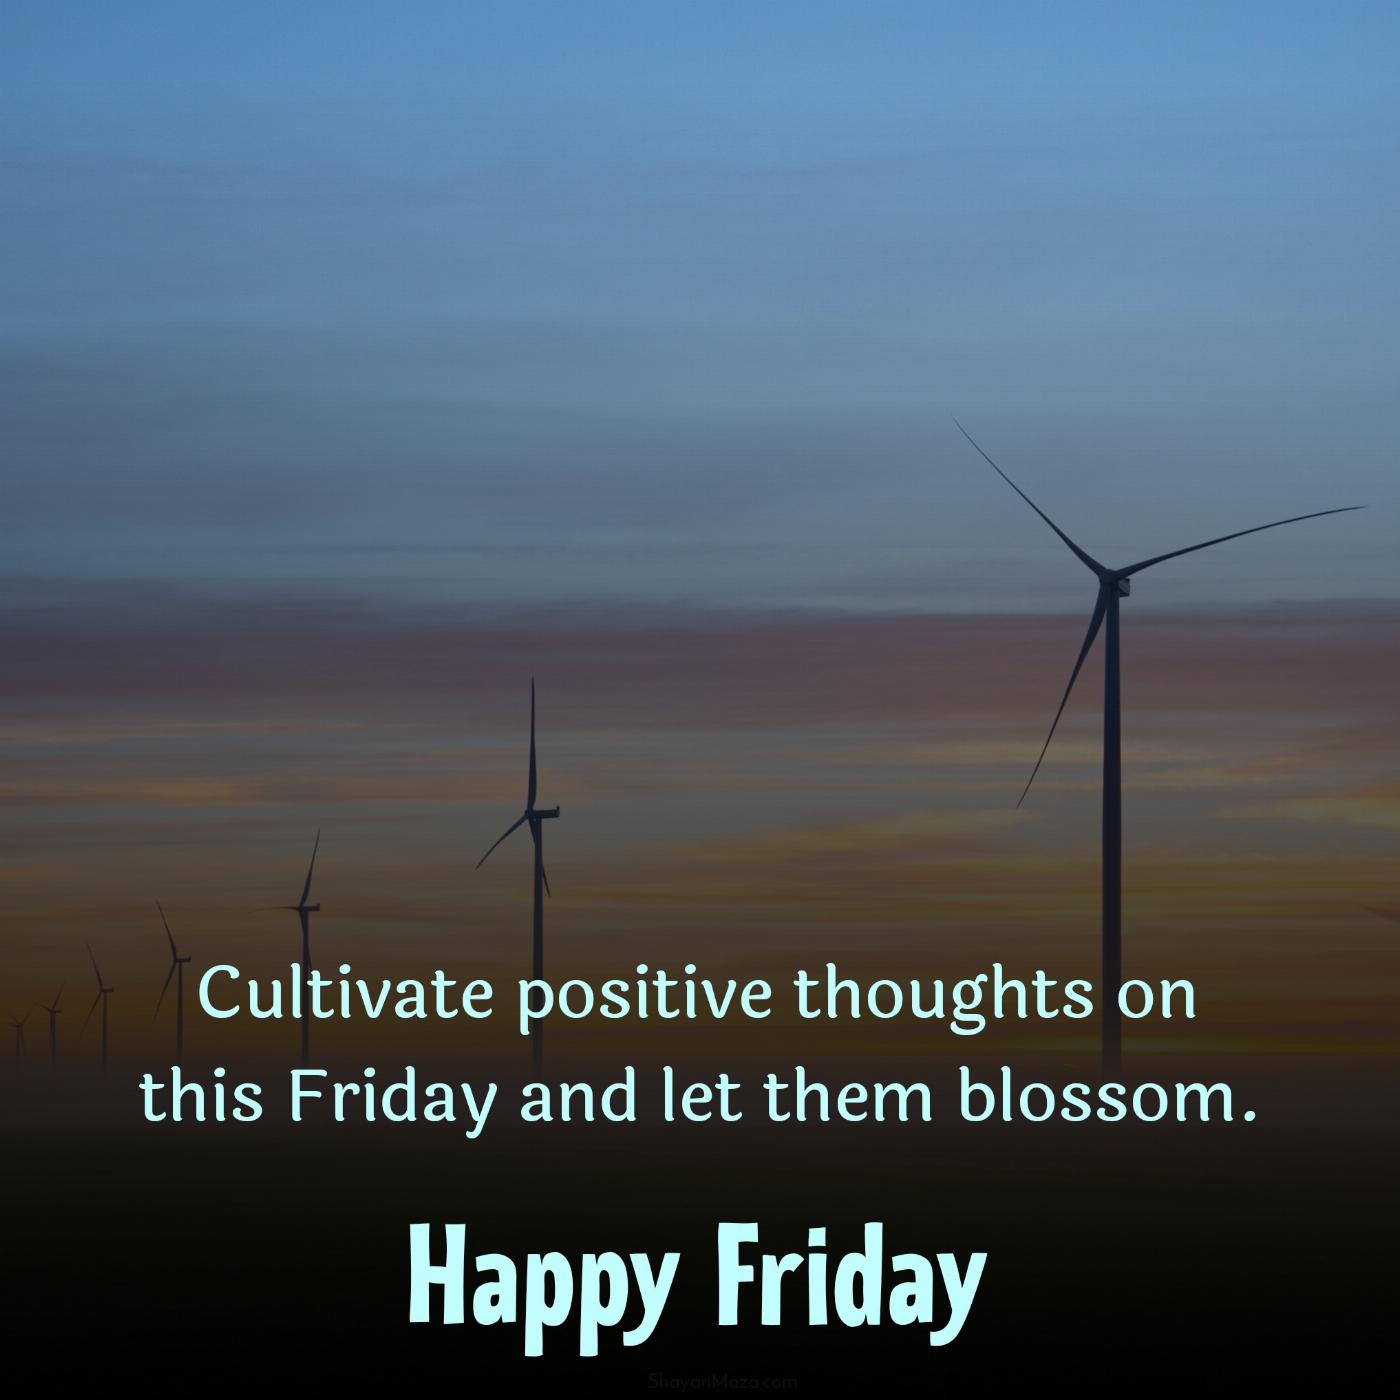 Cultivate positive thoughts on this Friday and let them blossom